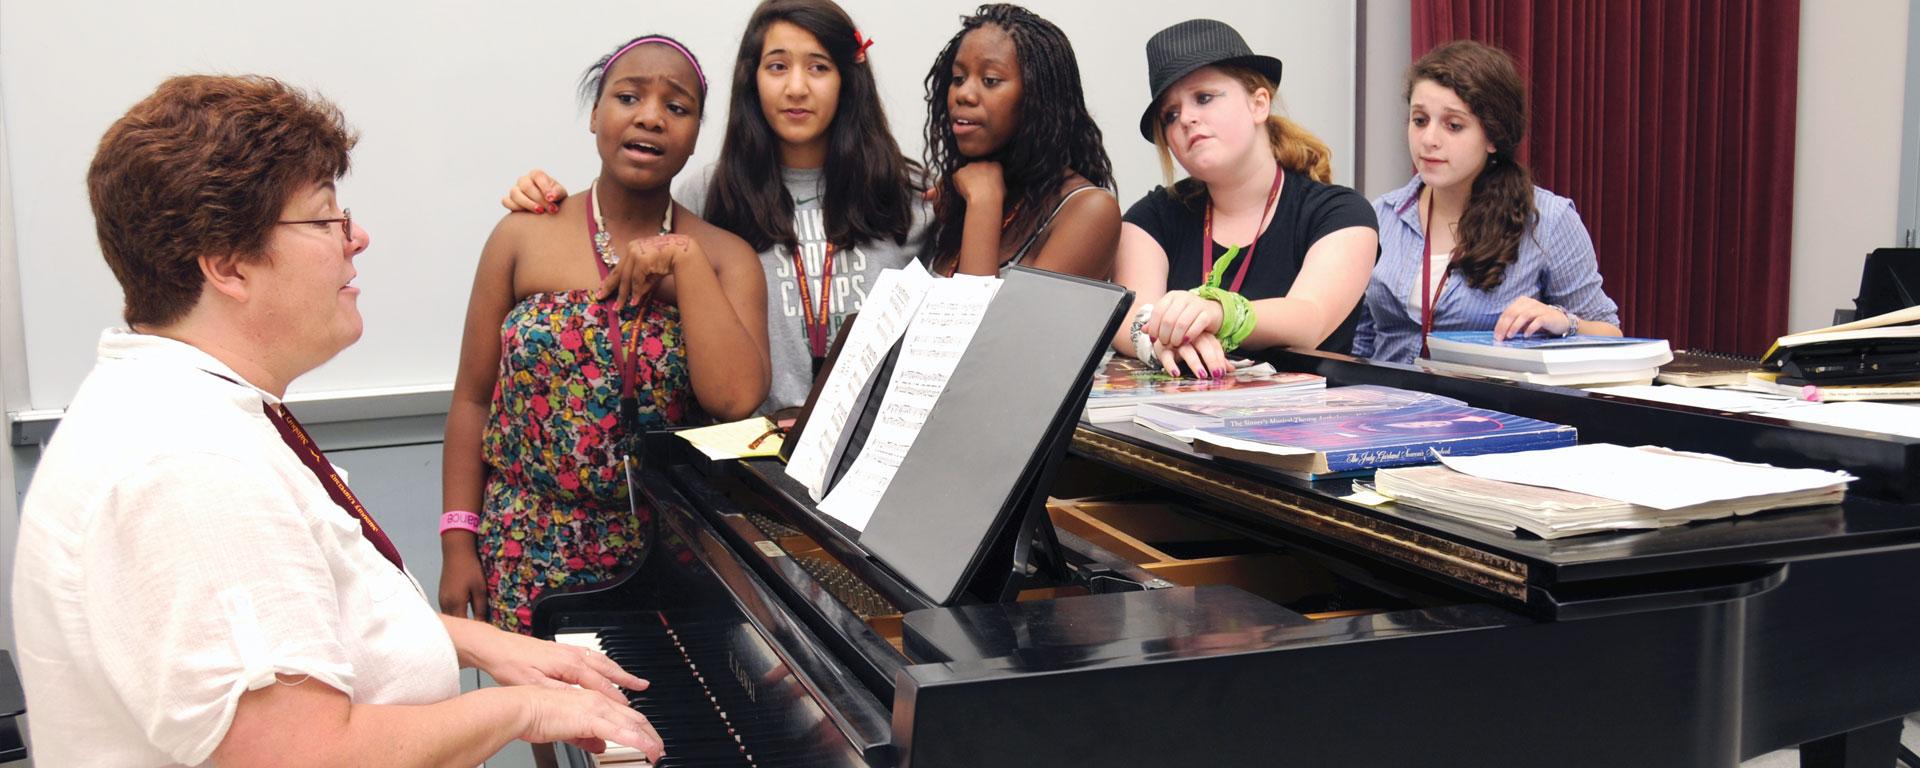 Students during a music academy